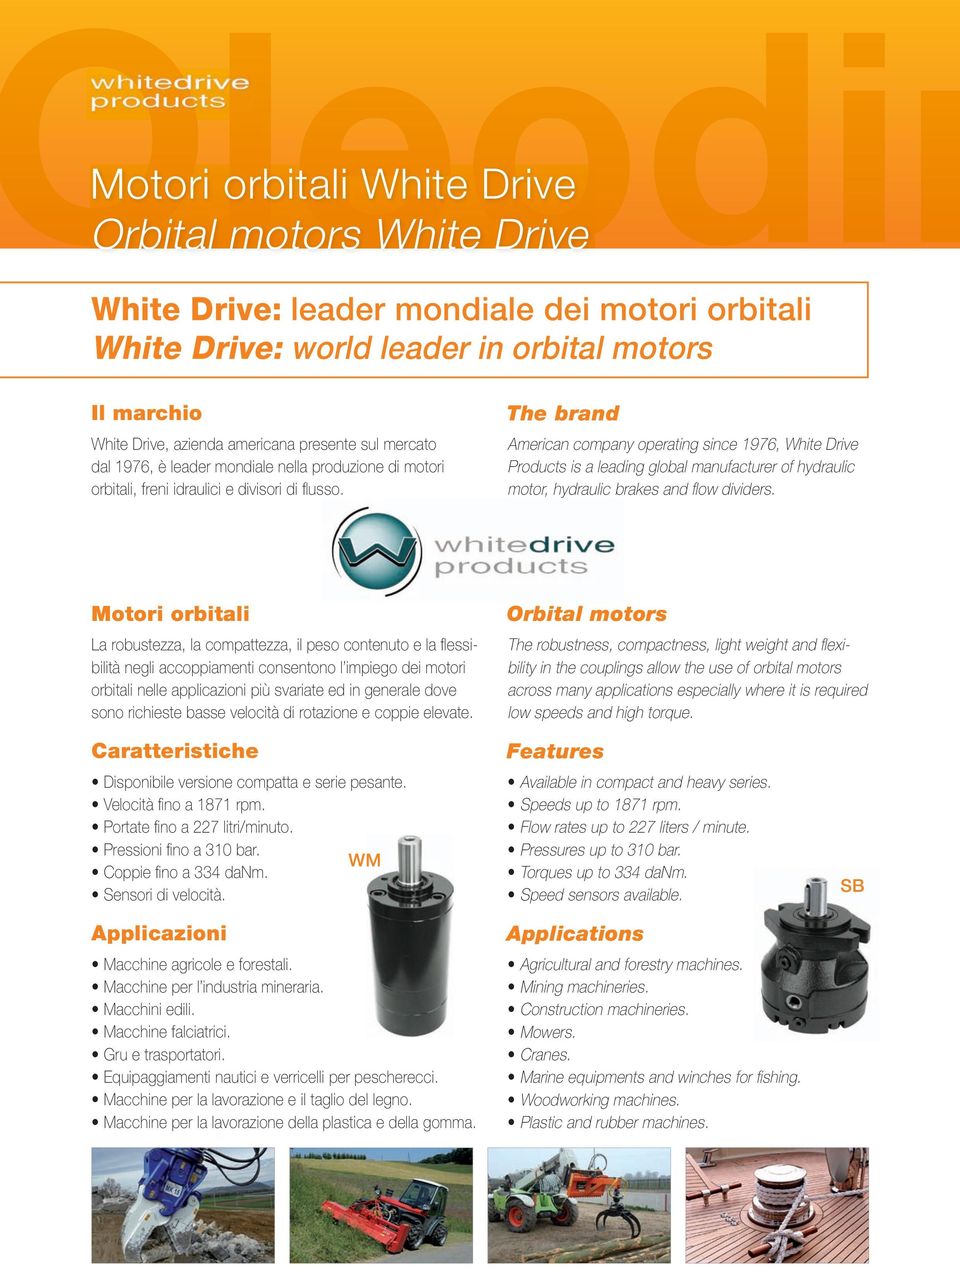 The brand American company operating since 1976, White Drive Products is a leading global manufacturer of hydraulic motor, hydraulic brakes and flow dividers.